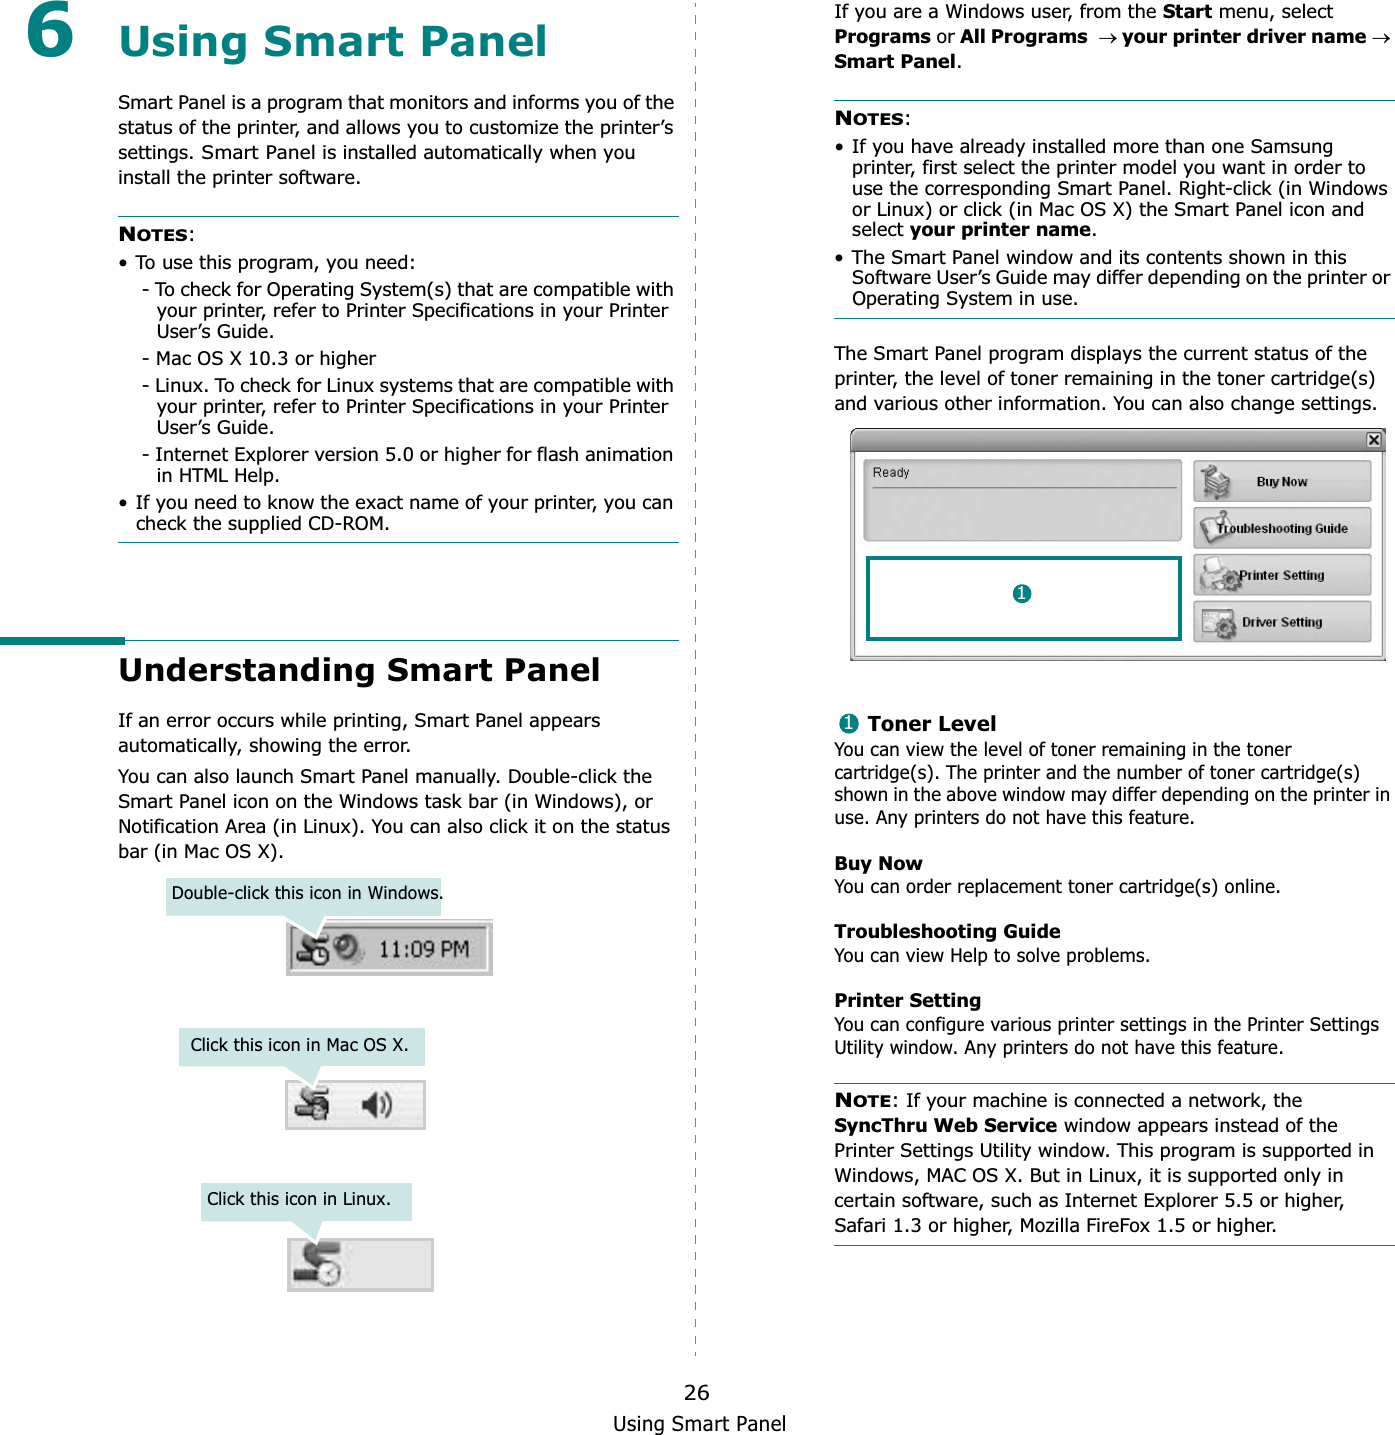 Using Smart Panel266Using Smart PanelSmart Panel is a program that monitors and informs you of the status of the printer, and allows you to customize the printer’s settings. Smart Panel is installed automatically when you install the printer software.NOTES:• To use this program, you need:- To check for Operating System(s) that are compatible with your printer, refer to Printer Specifications in your Printer User’s Guide.- Mac OS X 10.3 or higher- Linux. To check for Linux systems that are compatible with your printer, refer to Printer Specifications in your Printer User’s Guide.- Internet Explorer version 5.0 or higher for flash animation in HTML Help.• If you need to know the exact name of your printer, you can check the supplied CD-ROM.Understanding Smart PanelIf an error occurs while printing, Smart Panel appears automatically, showing the error.You can also launch Smart Panel manually. Double-click the Smart Panel icon on the Windows task bar (in Windows), or Notification Area (in Linux). You can also click it on the status bar (in Mac OS X).Double-click this icon in Windows.Click this icon in Mac OS X.Click this icon in Linux.If you are a Windows user, from the Start menu, select Programs or All Programsoyour printer driver nameoSmart Panel.NOTES:• If you have already installed more than one Samsung printer, first select the printer model you want in order to use the corresponding Smart Panel. Right-click (in Windows or Linux) or click (in Mac OS X) the Smart Panel icon and select your printer name.• The Smart Panel window and its contents shown in this Software User’s Guide may differ depending on the printer or Operating System in use.The Smart Panel program displays the current status of the printer, the level of toner remaining in the toner cartridge(s) and various other information. You can also change settings.Toner LevelYou can view the level of toner remaining in the toner cartridge(s). The printer and the number of toner cartridge(s) shown in the above window may differ depending on the printer in use. Any printers do not have this feature.Buy NowYou can order replacement toner cartridge(s) online.Troubleshooting GuideYou can view Help to solve problems.Printer SettingYou can configure various printer settings in the Printer Settings Utility window. Any printers do not have this feature.NOTE: If your machine is connected a network, the SyncThru Web Service window appears instead of the Printer Settings Utility window. This program is supported in Windows, MAC OS X. But in Linux, it is supported only in certain software, such as Internet Explorer 5.5 or higher, Safari 1.3 or higher, Mozilla FireFox 1.5 or higher. 11